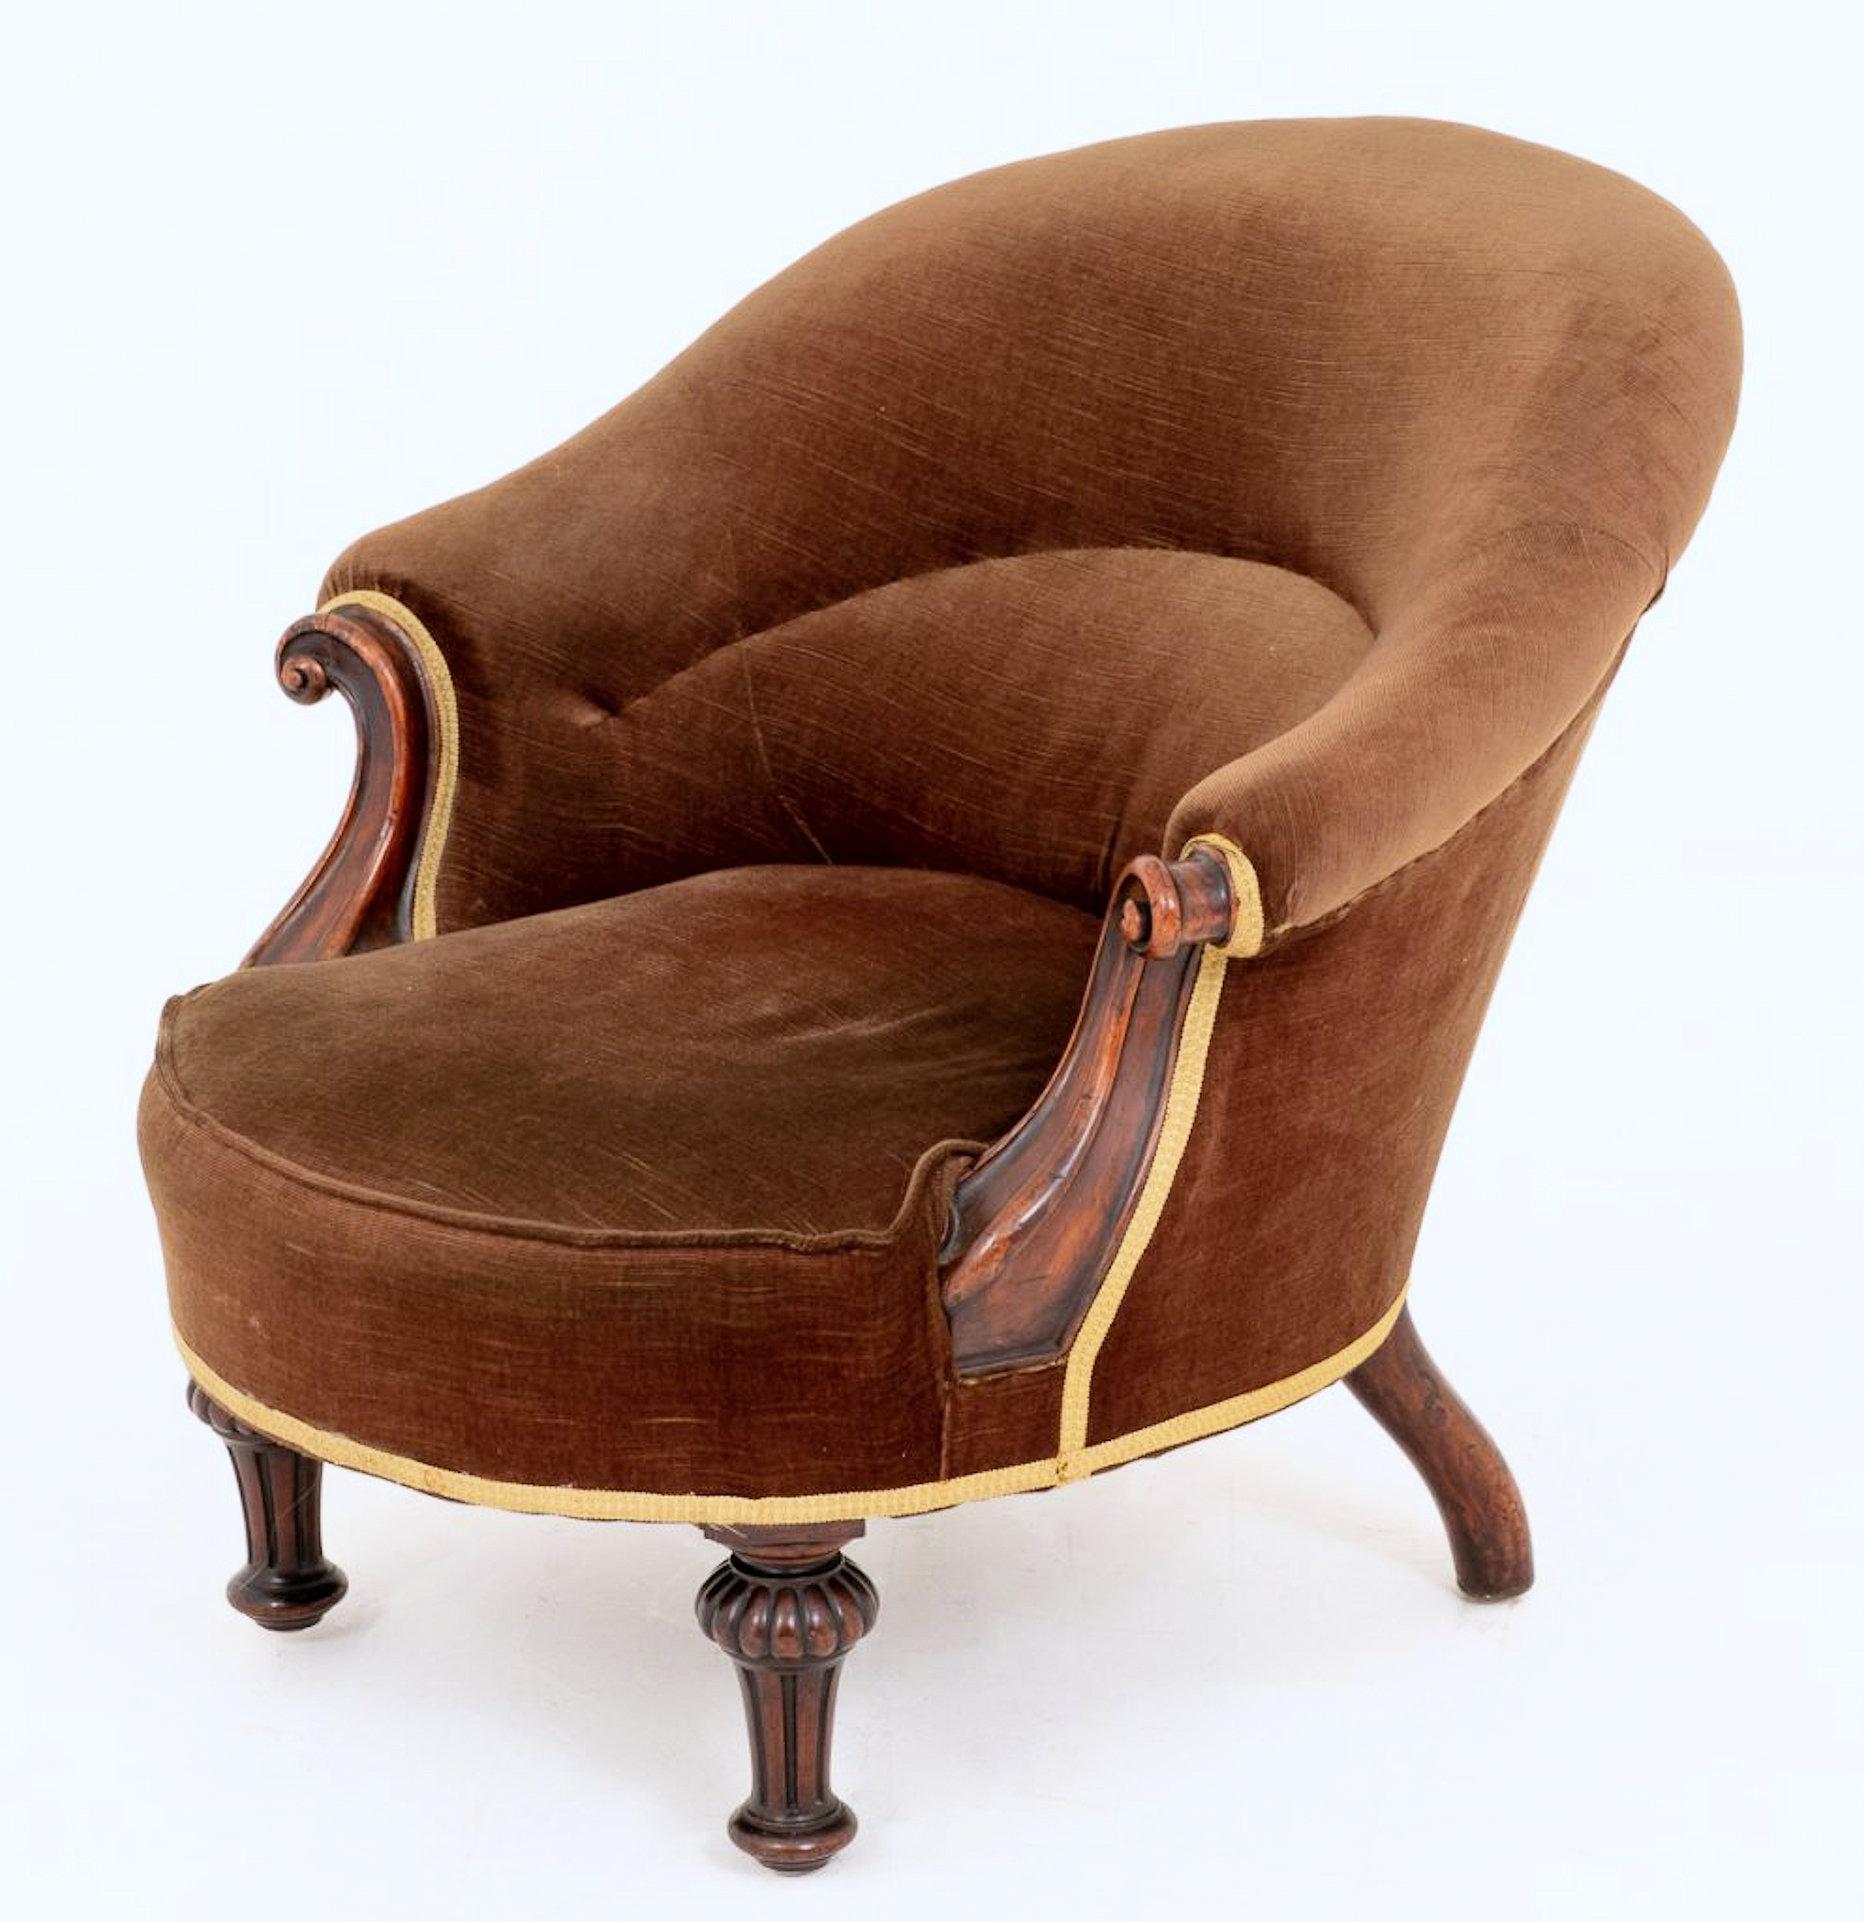 This extremely comfortable 19th century. English upholstered tub chair features nicely turned fluted front and swept back legs with rolled arm supports and an additional padded back support. It measures 30 in – 76 cm wide, 32 in – 81 cm deep and 29